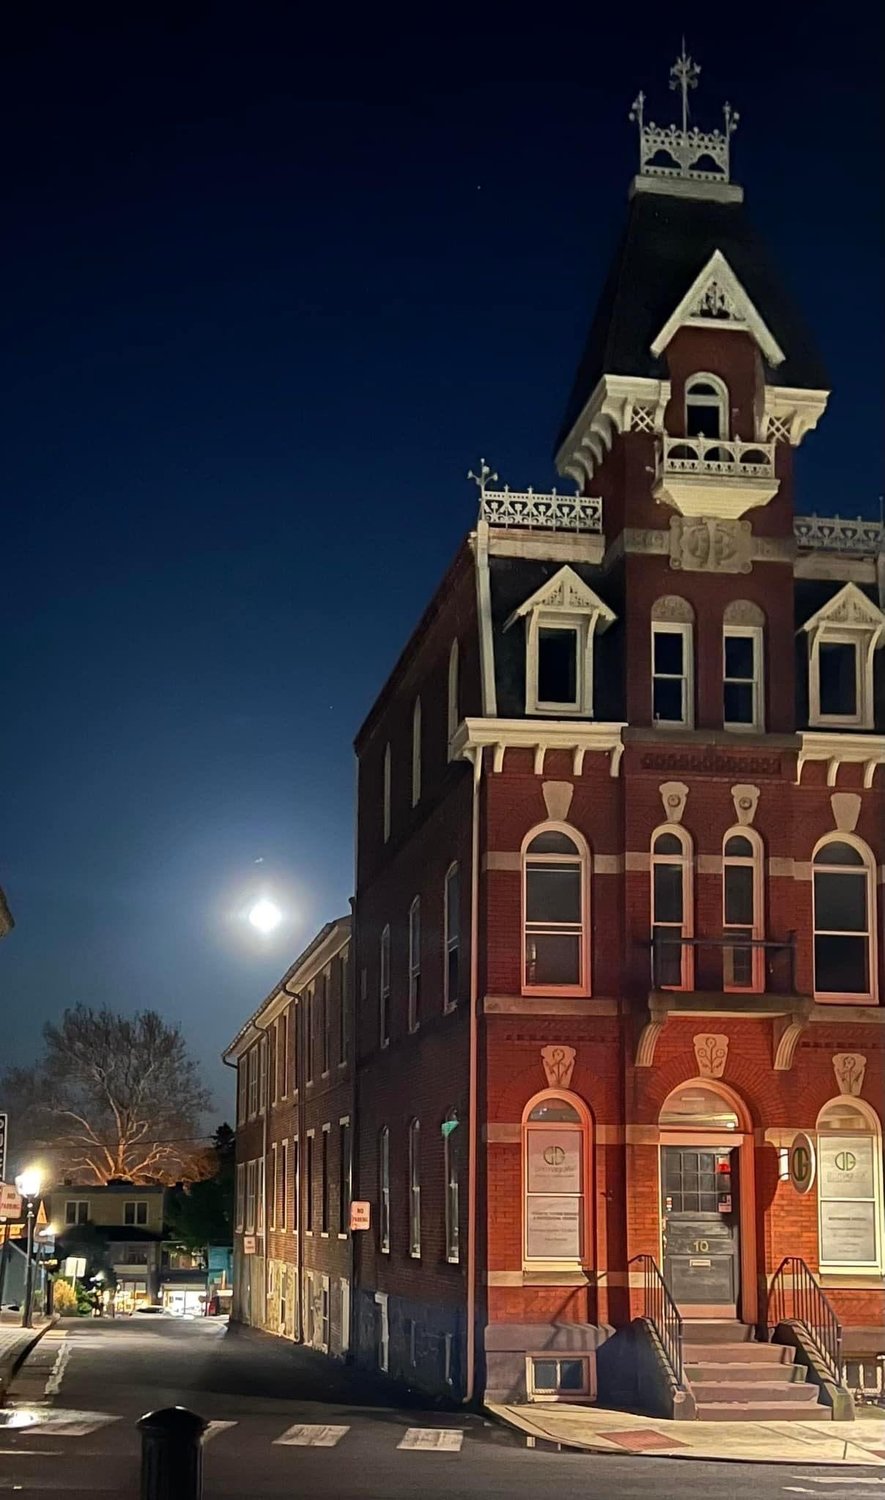 Moonrise in Doylestown Monday night casts a spell on Court Street in Doylestown. It was the night after a Superflower Blood Moon, a total lunar eclipse.